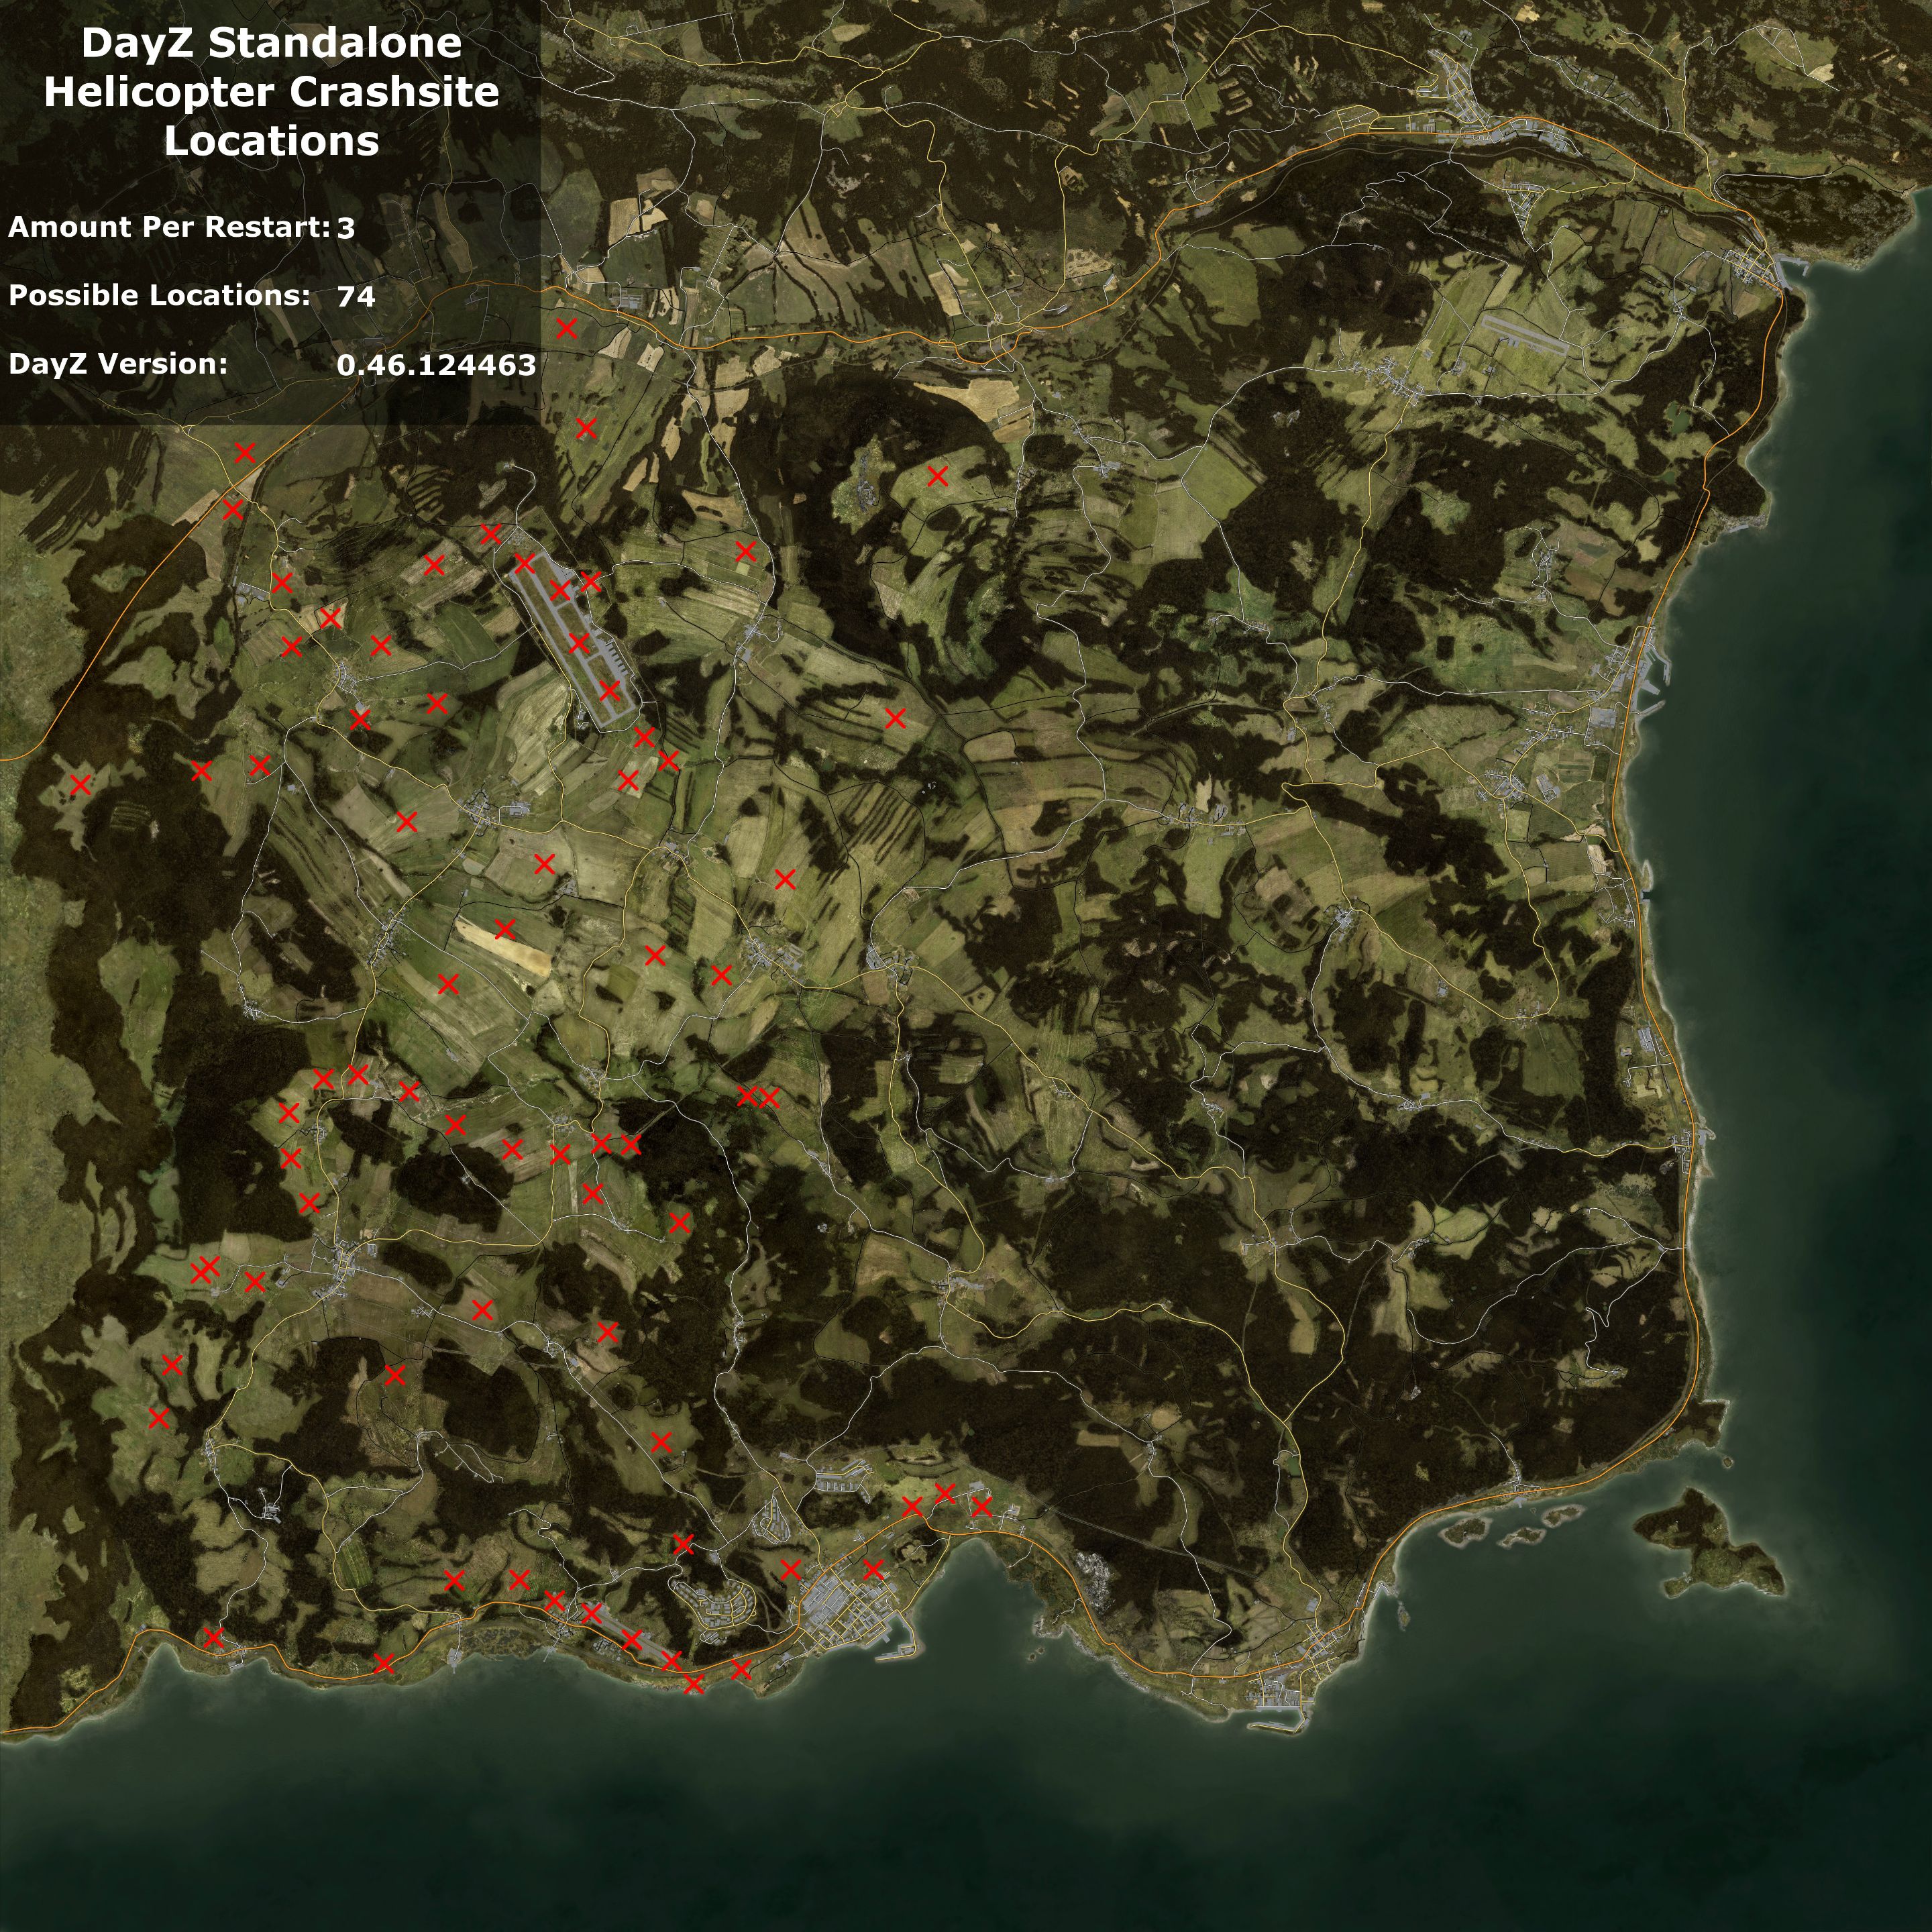 Where to find the Crackers in DayZ  Find gear easily using the DayZ Loot  Finder spawn point loot location maps